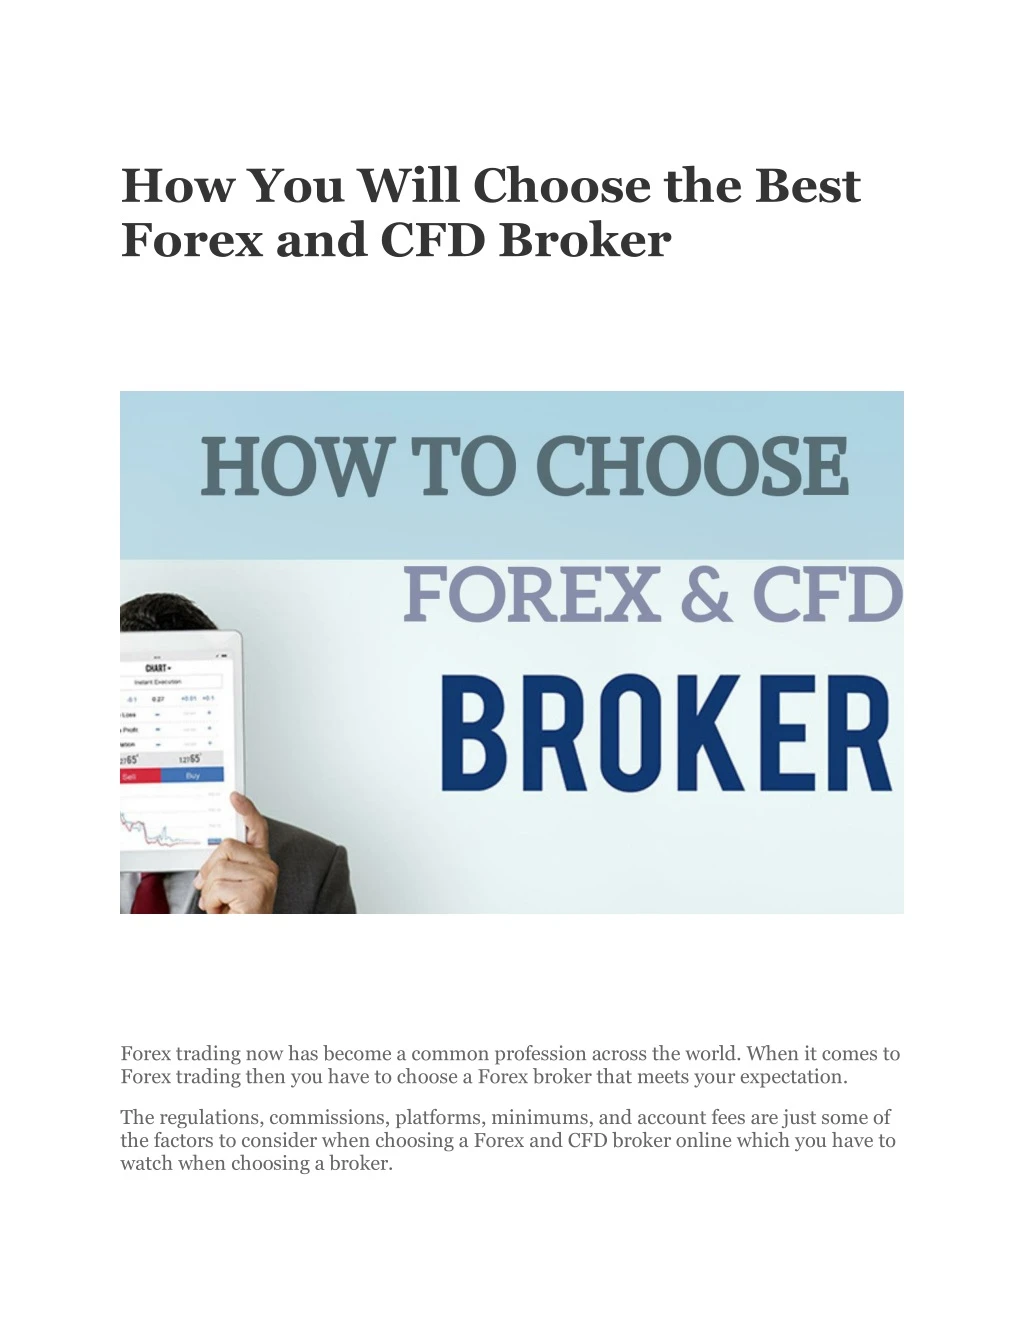 how you will choose the best forex and cfd broker